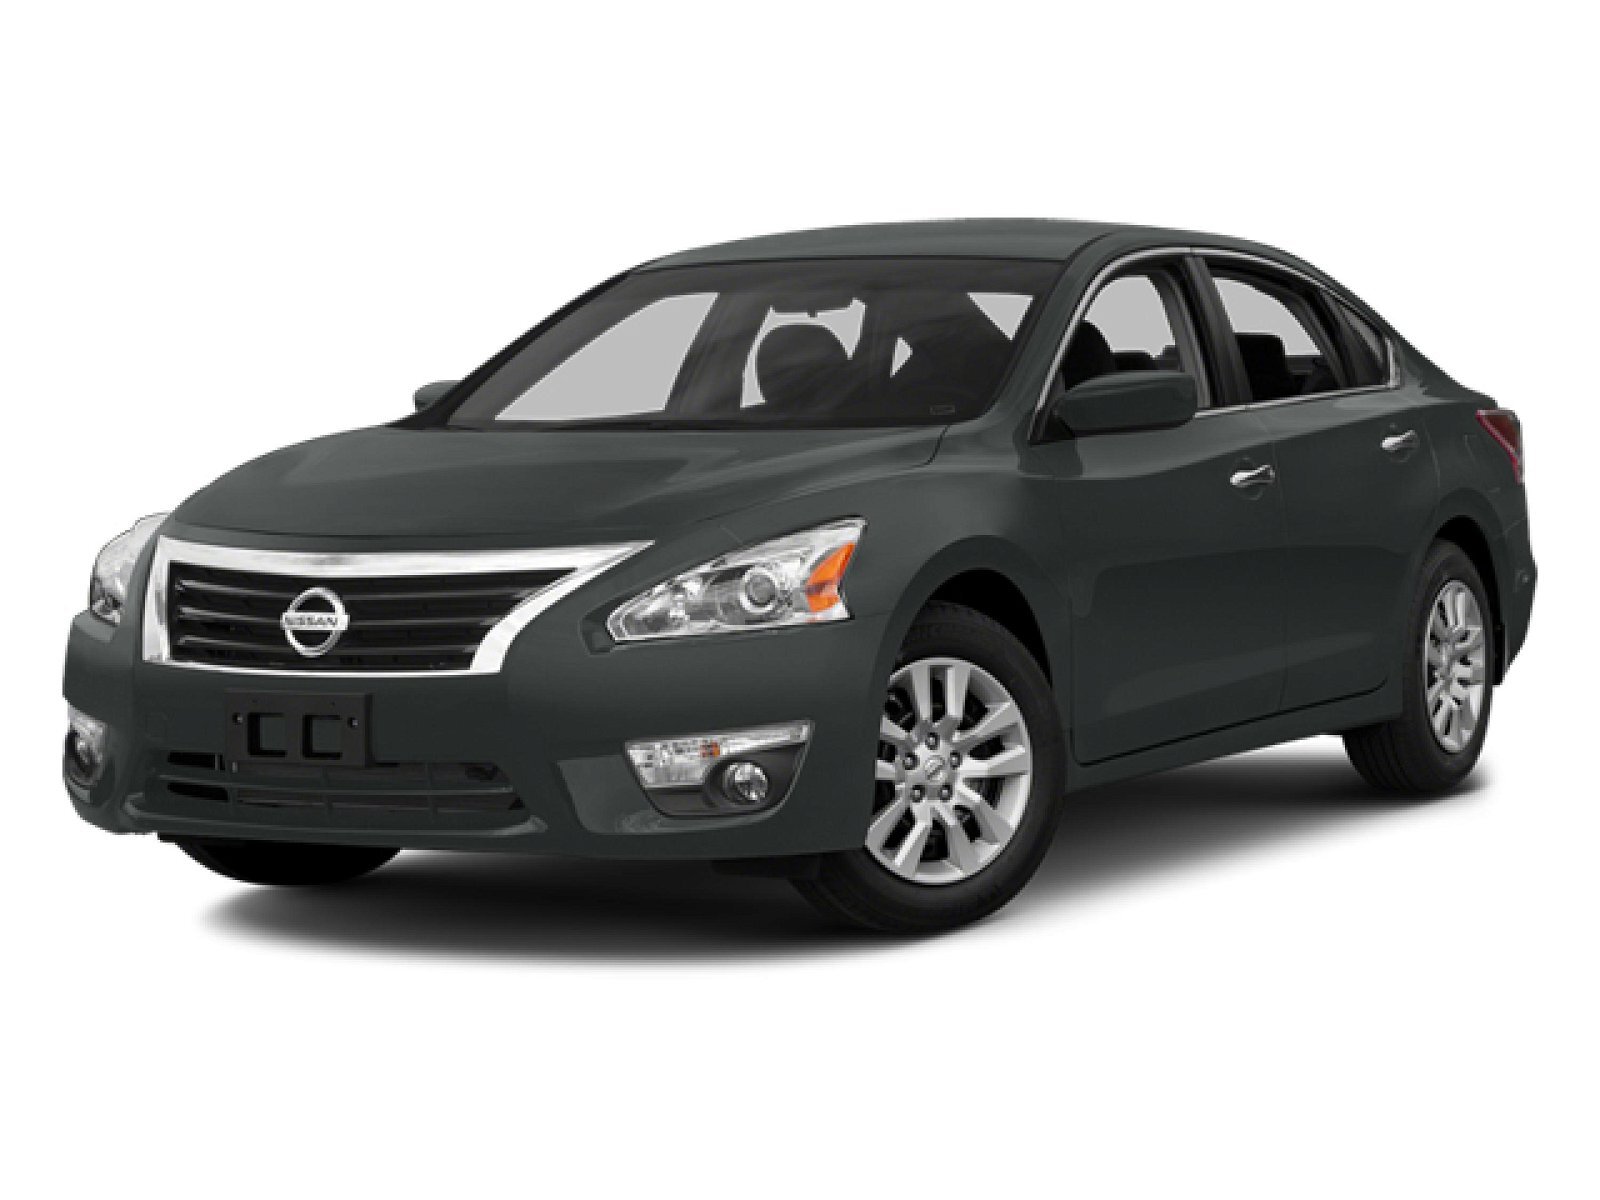 2014 Nissan Altima 2.5 SL Locally Owned | One Owner | Low KM's